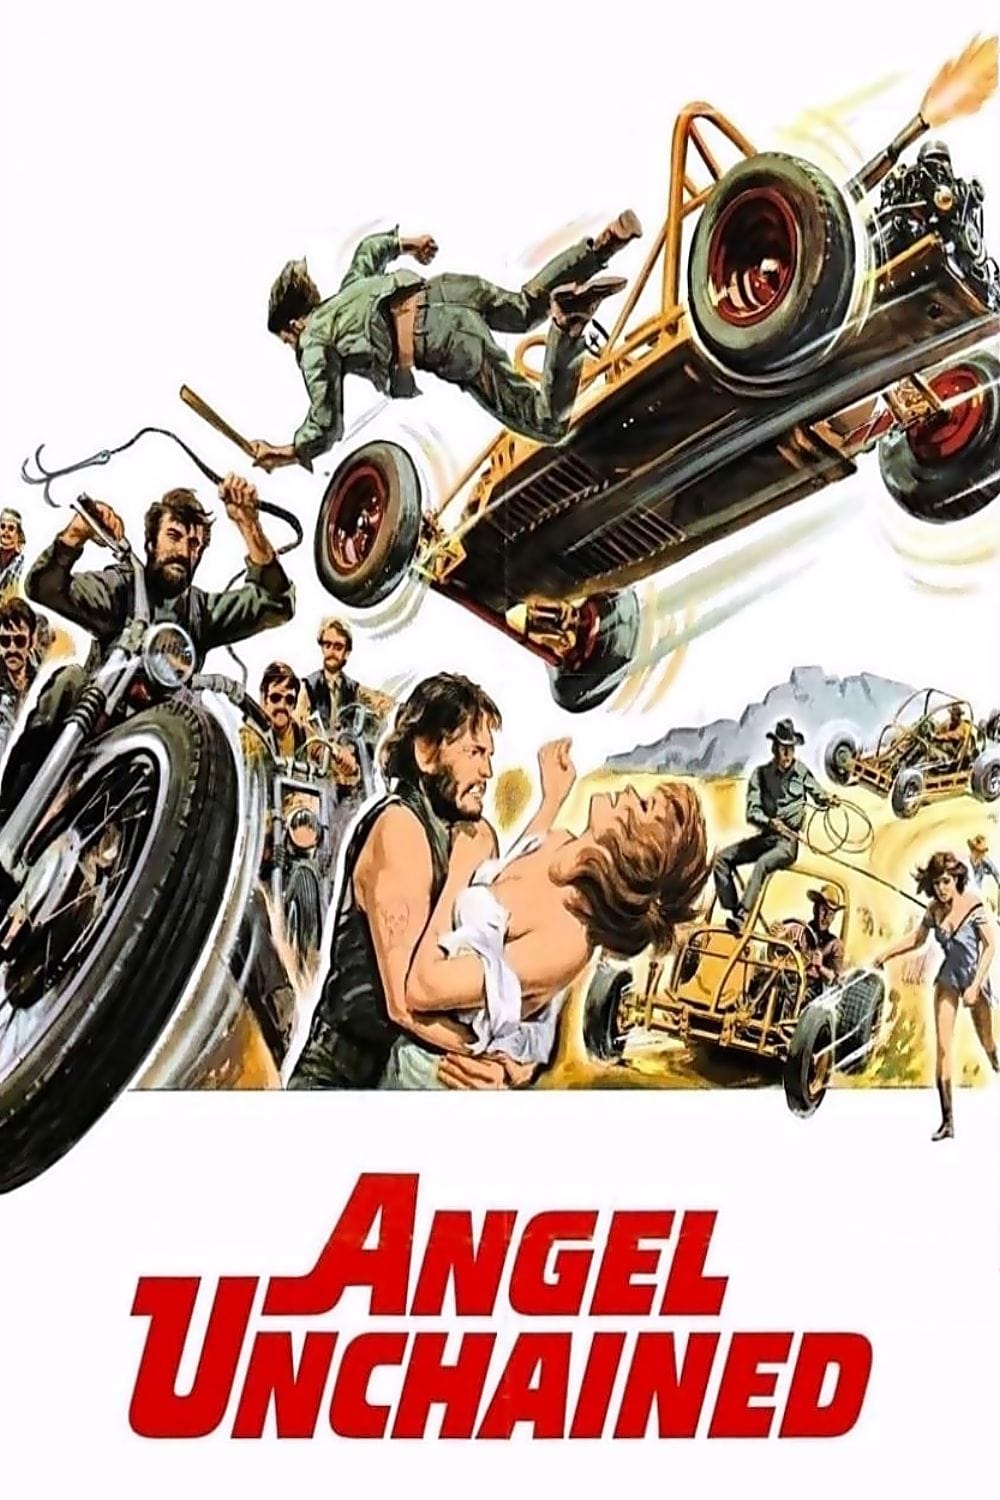 Angel Unchained (1970)